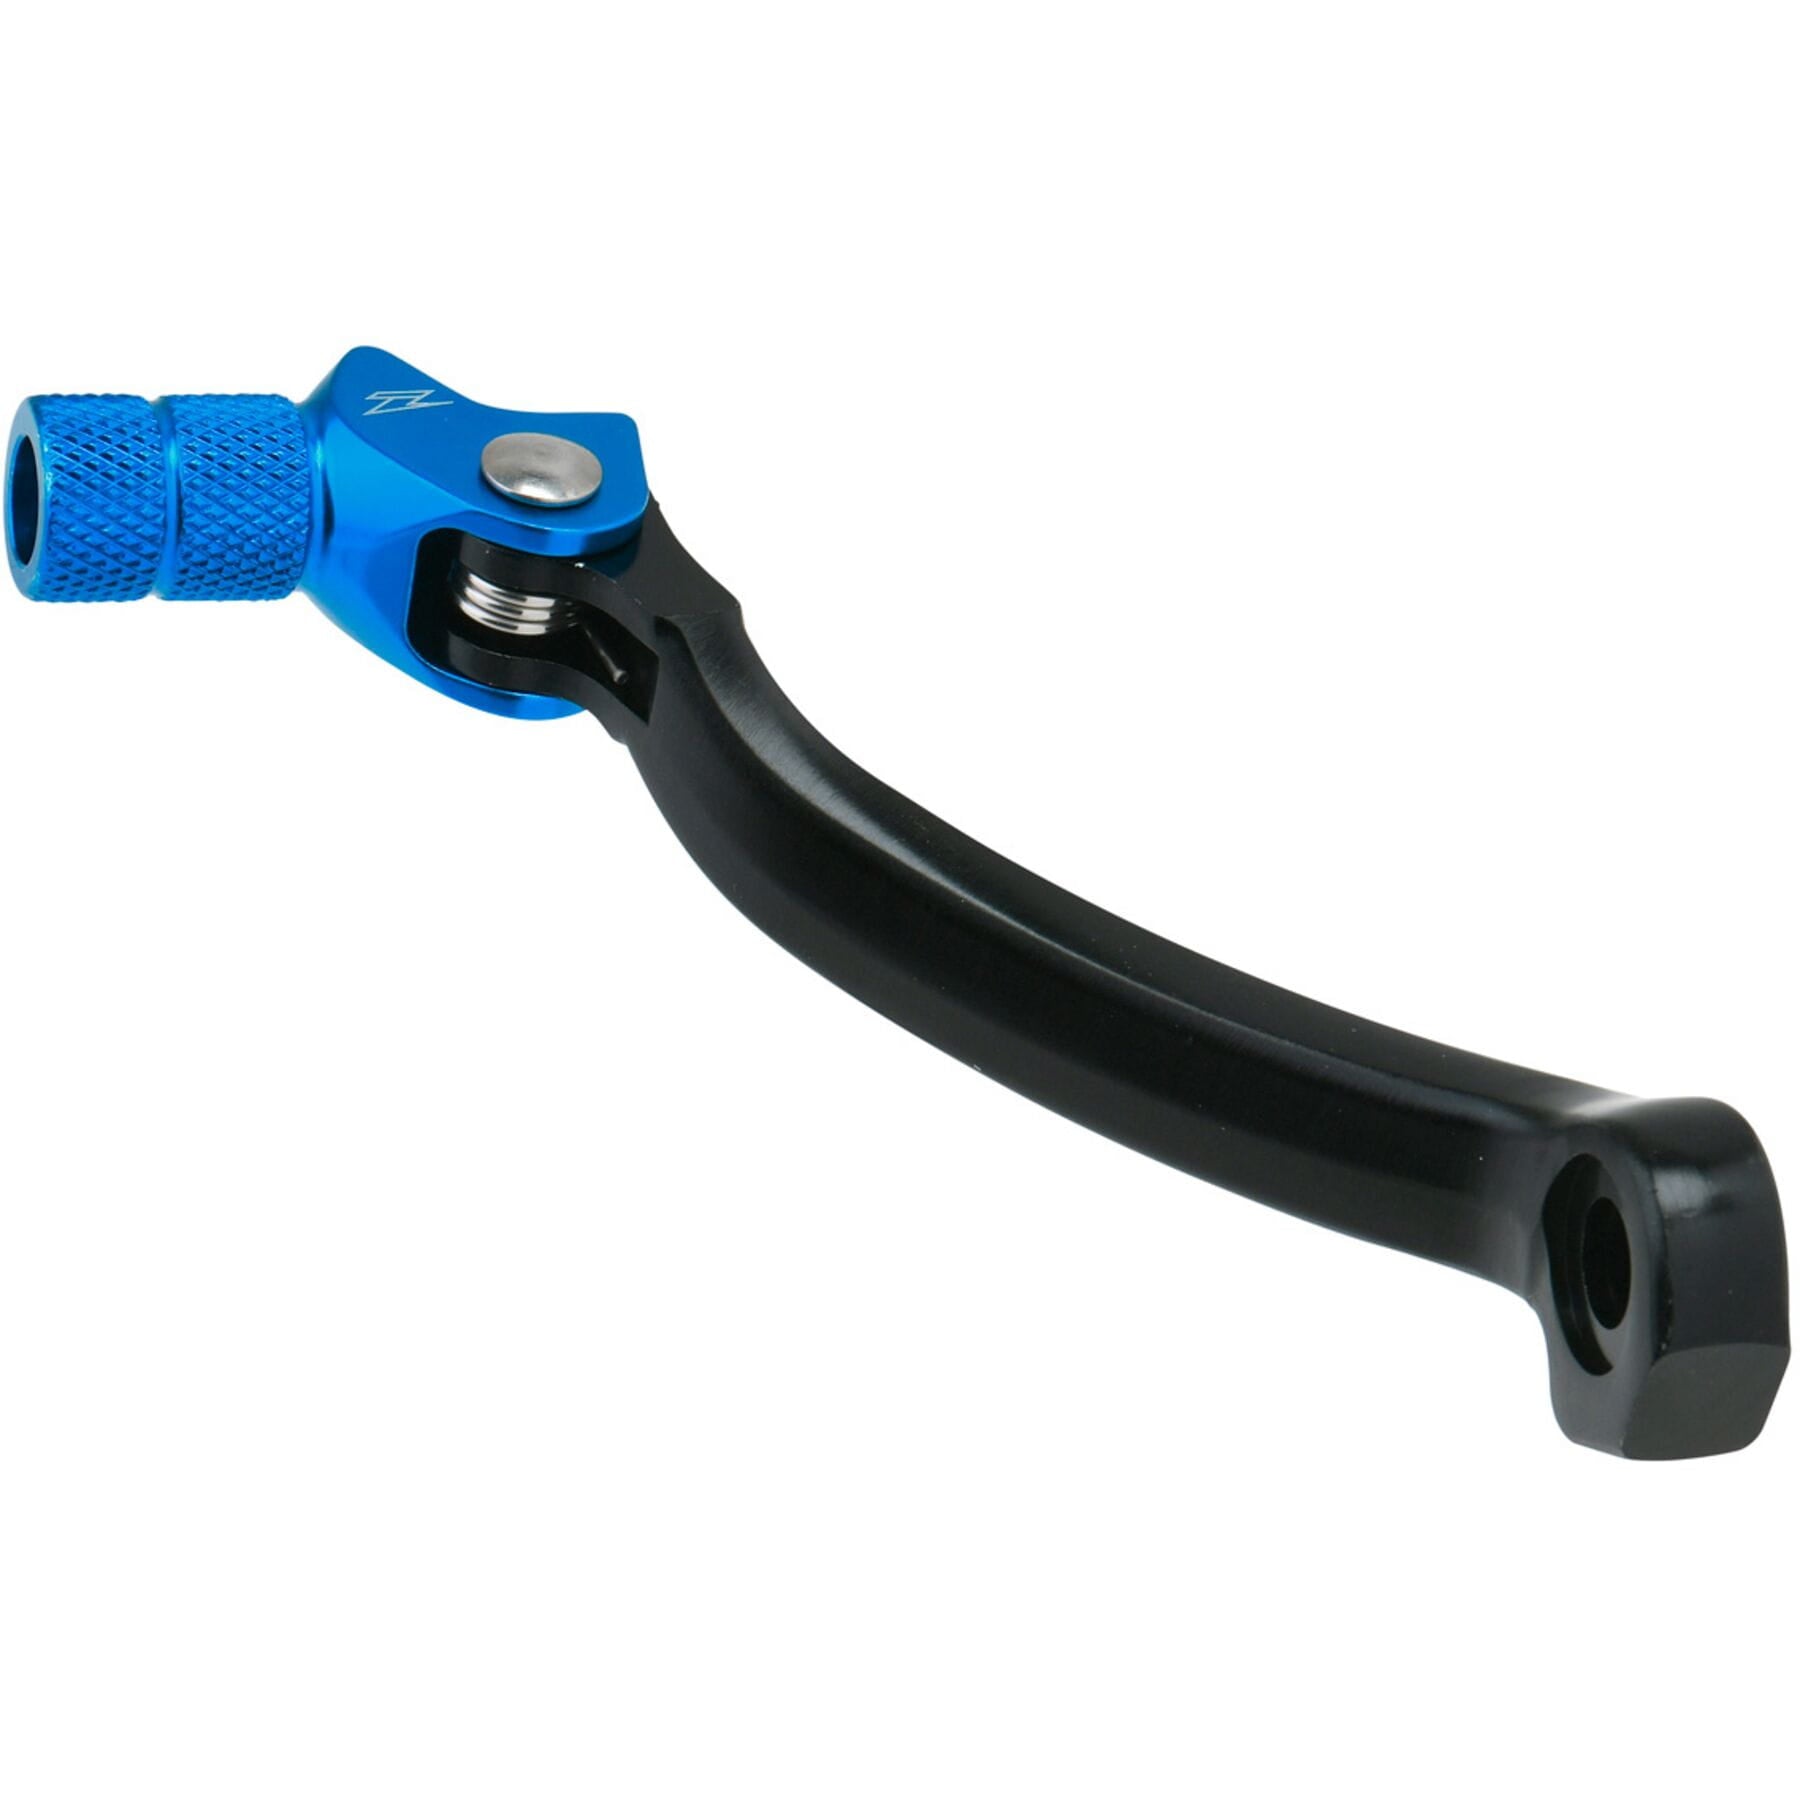 Blue Forged Shift Lever for Husky FC/FE 450 17-22 and TC125 16 Models